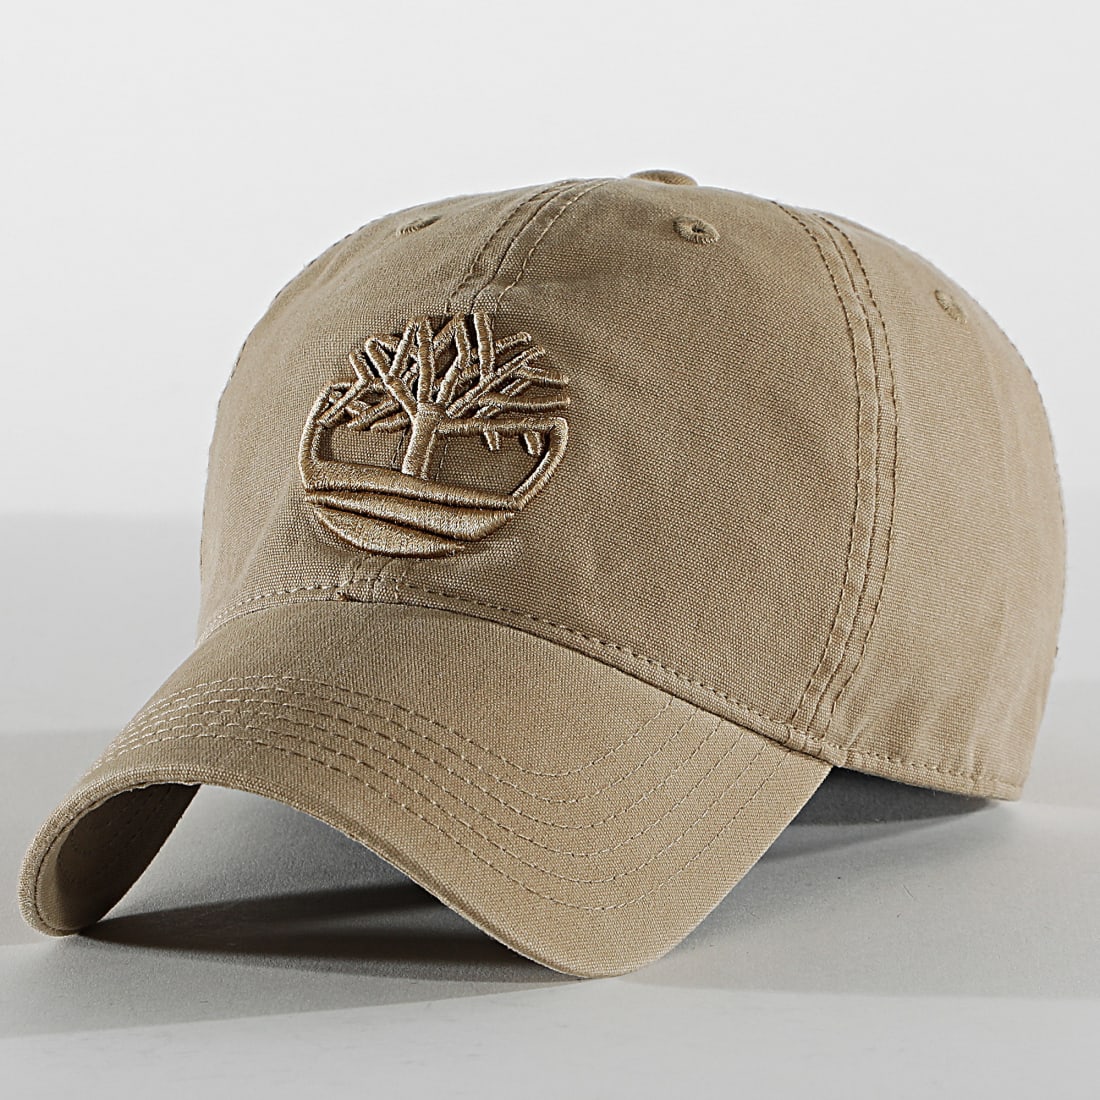 Timberland Cotton Canvas Cap Embroidered Tree Logo - A1E9M